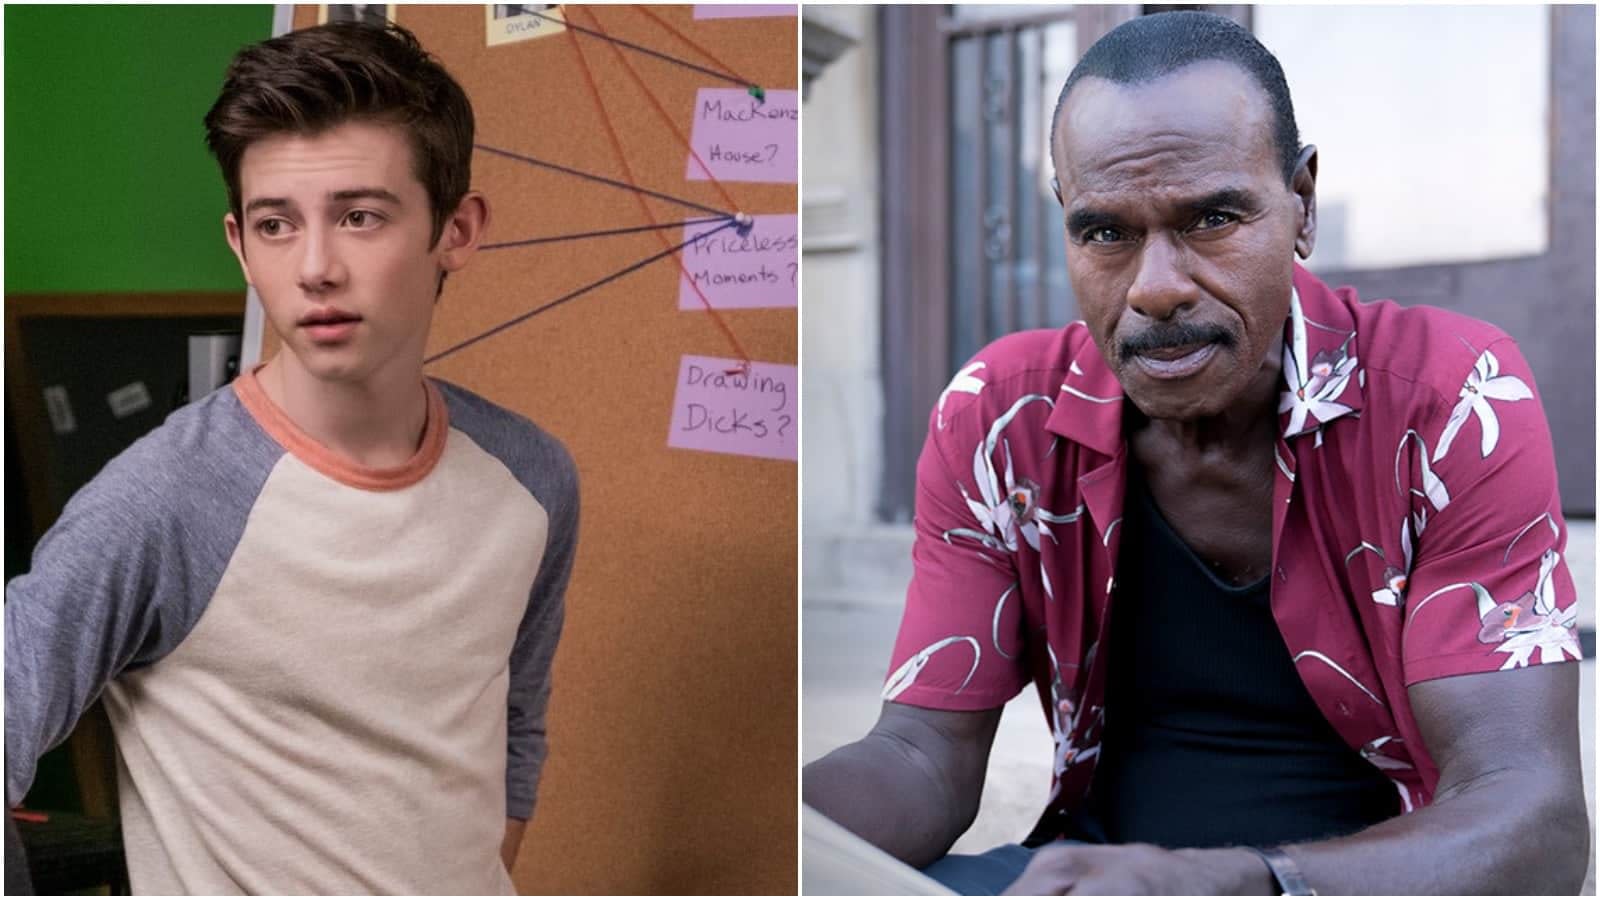 'Locke &#038; Key': American Vandal's Griffin Gluck, The Chi's Steven Williams Join Netflix Series